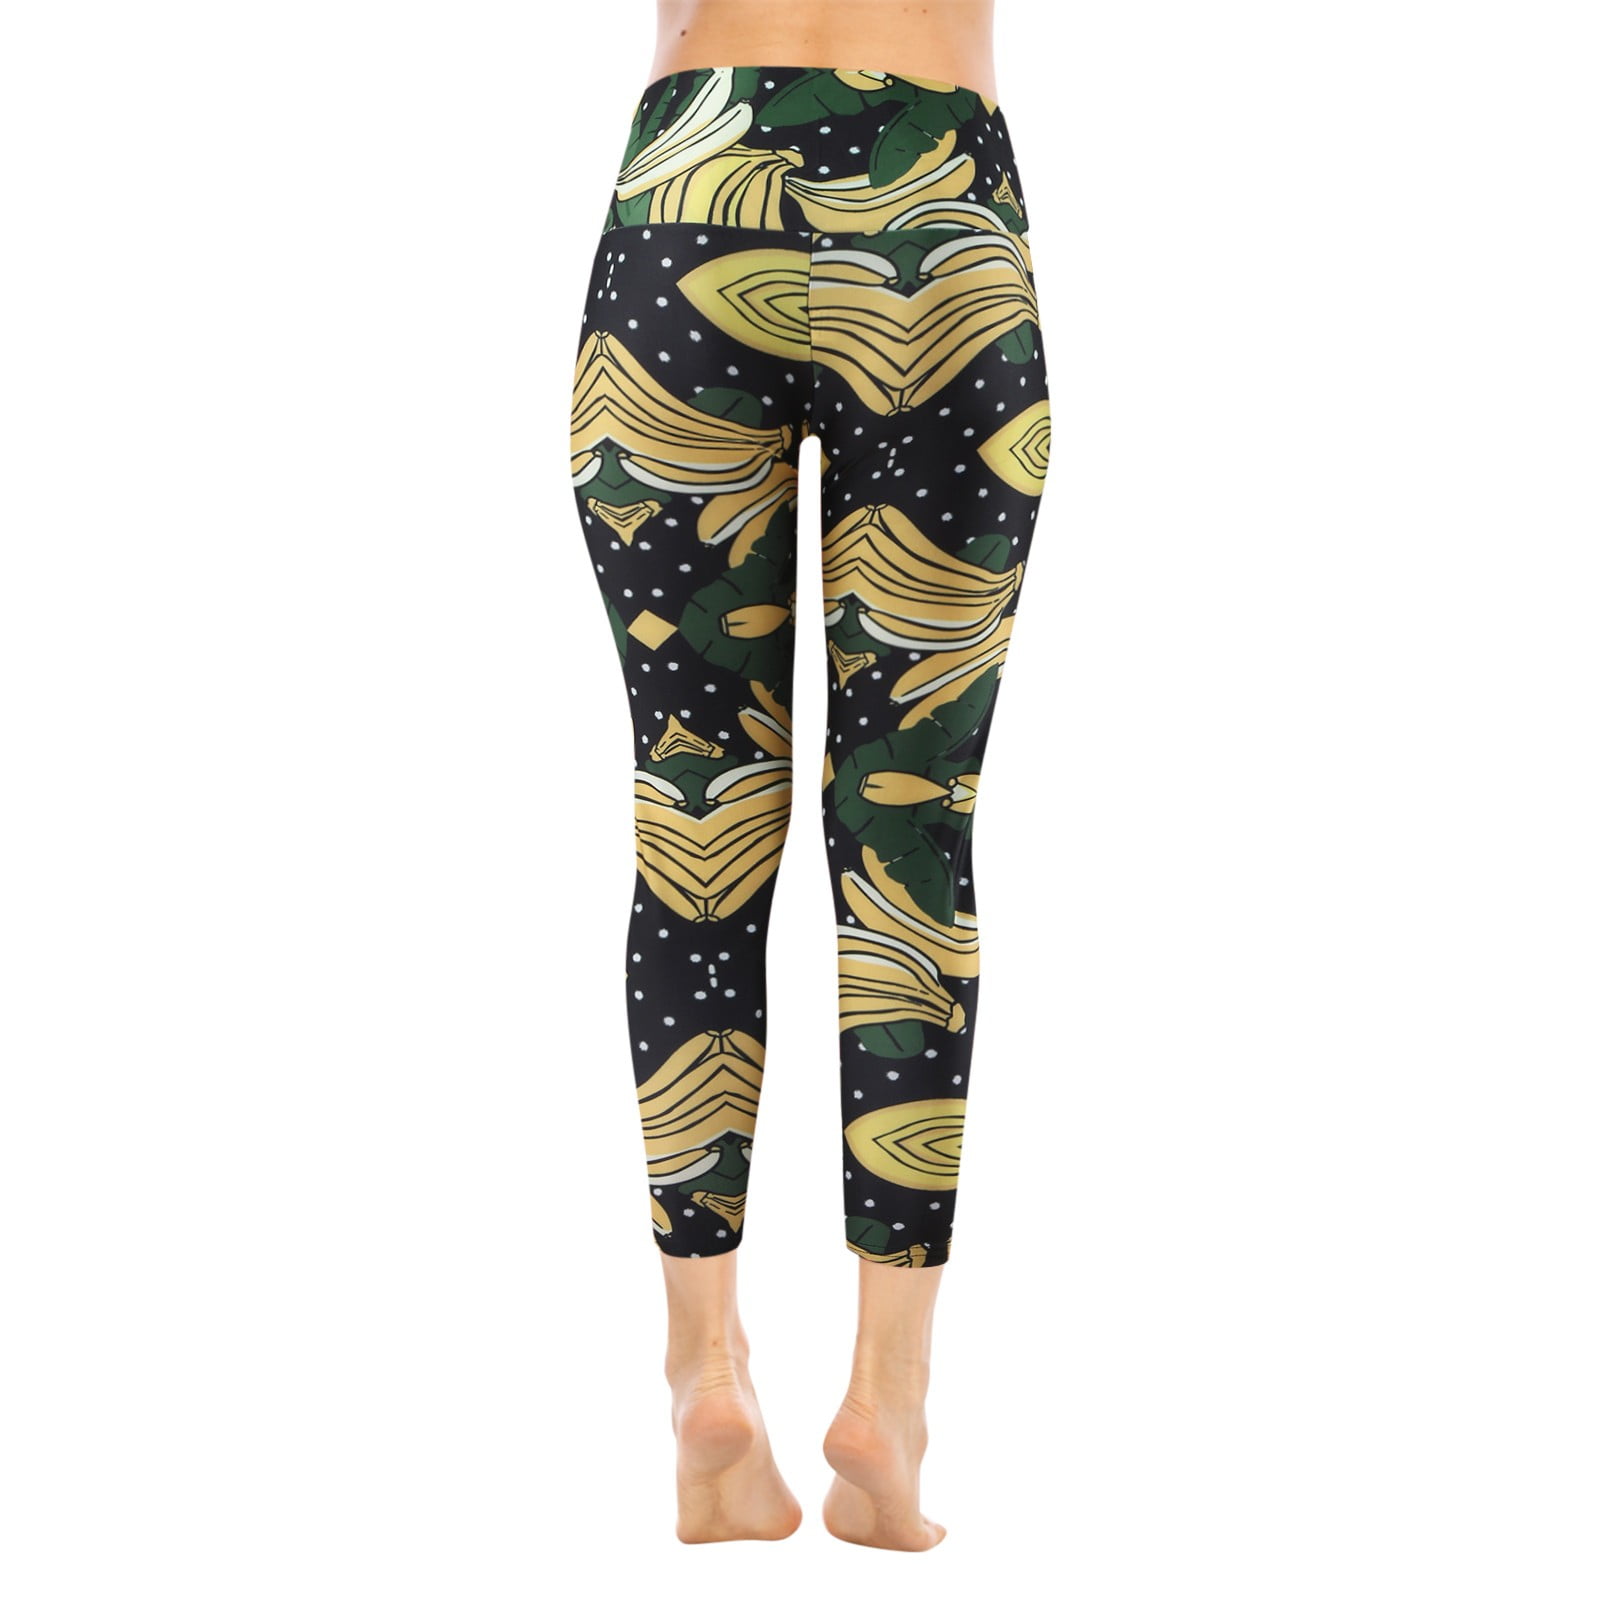 HSMQHJWE Yoga Flare Pants for Women Tall Women's Casual Running Tights  Floral Print Slim High Waist Stretch Fitness Pants Yoga Leggings Ice Silk  Fitness Running Stretch Yoga Pant 